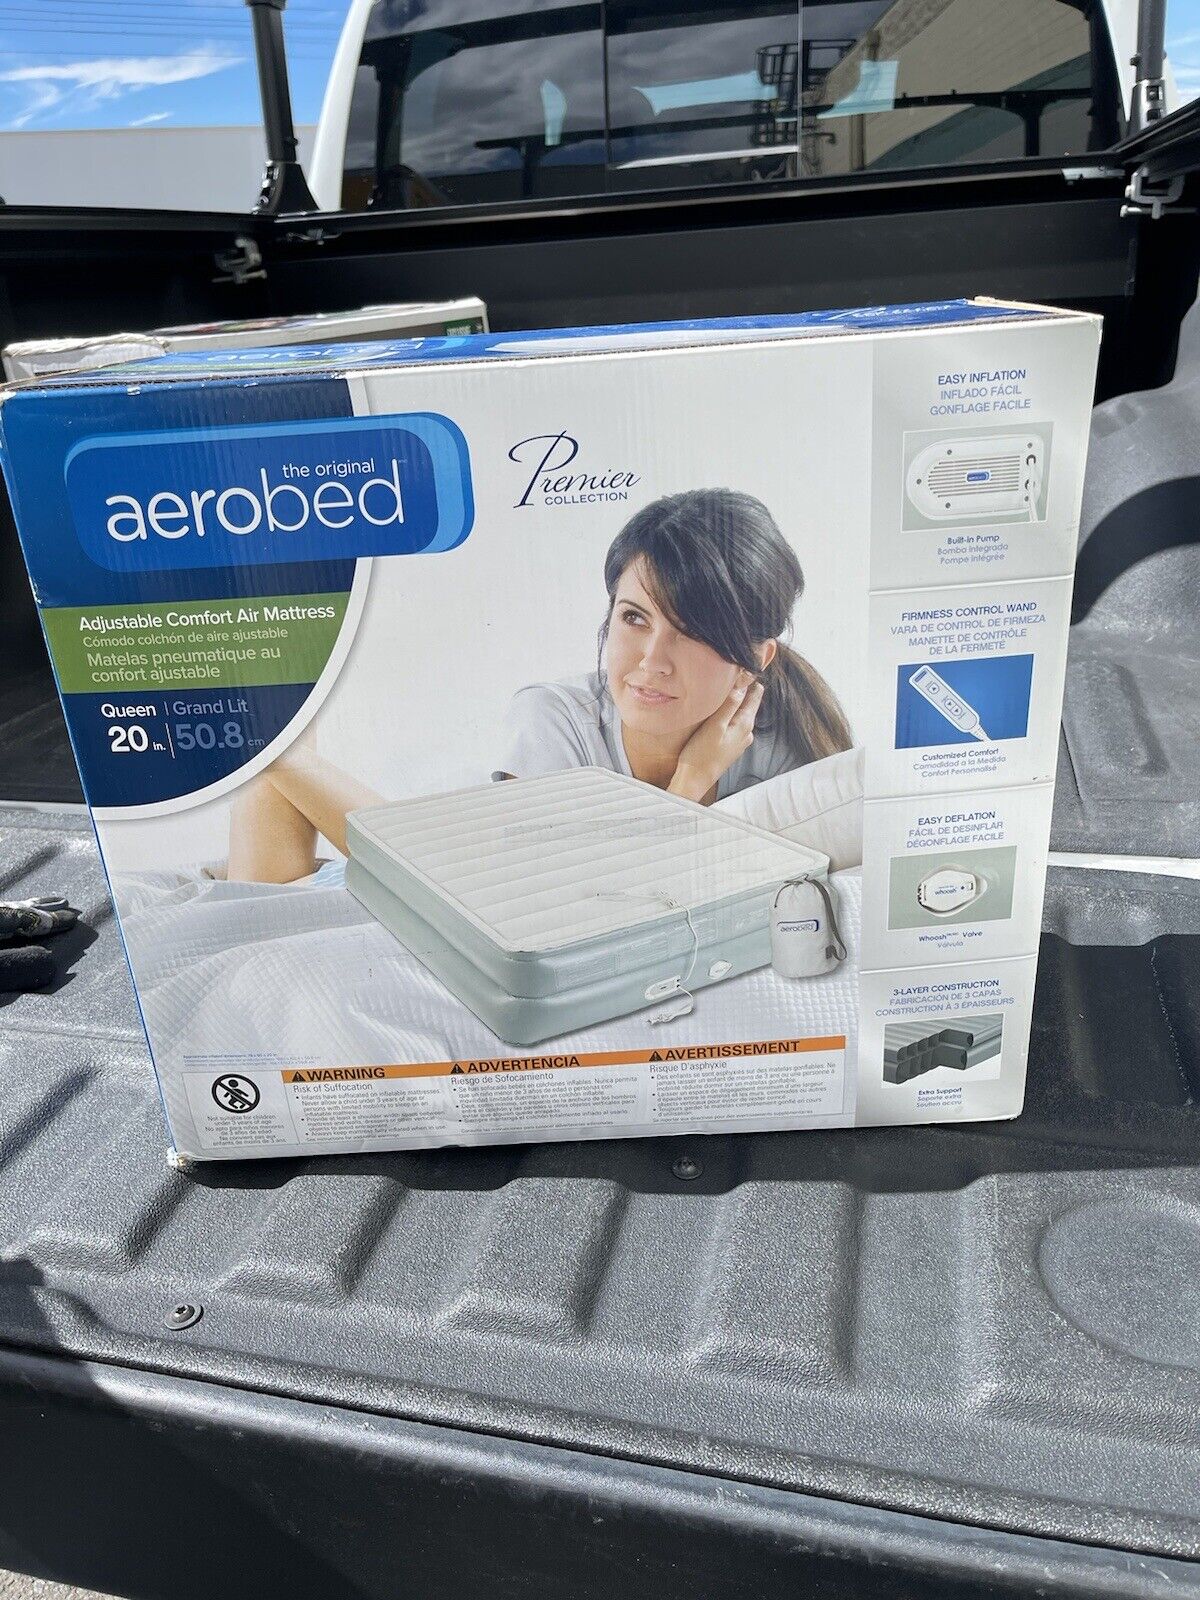 Aerobed Air Bed Mattress Queen Size 20” With Built-In Electric Pump New In Box